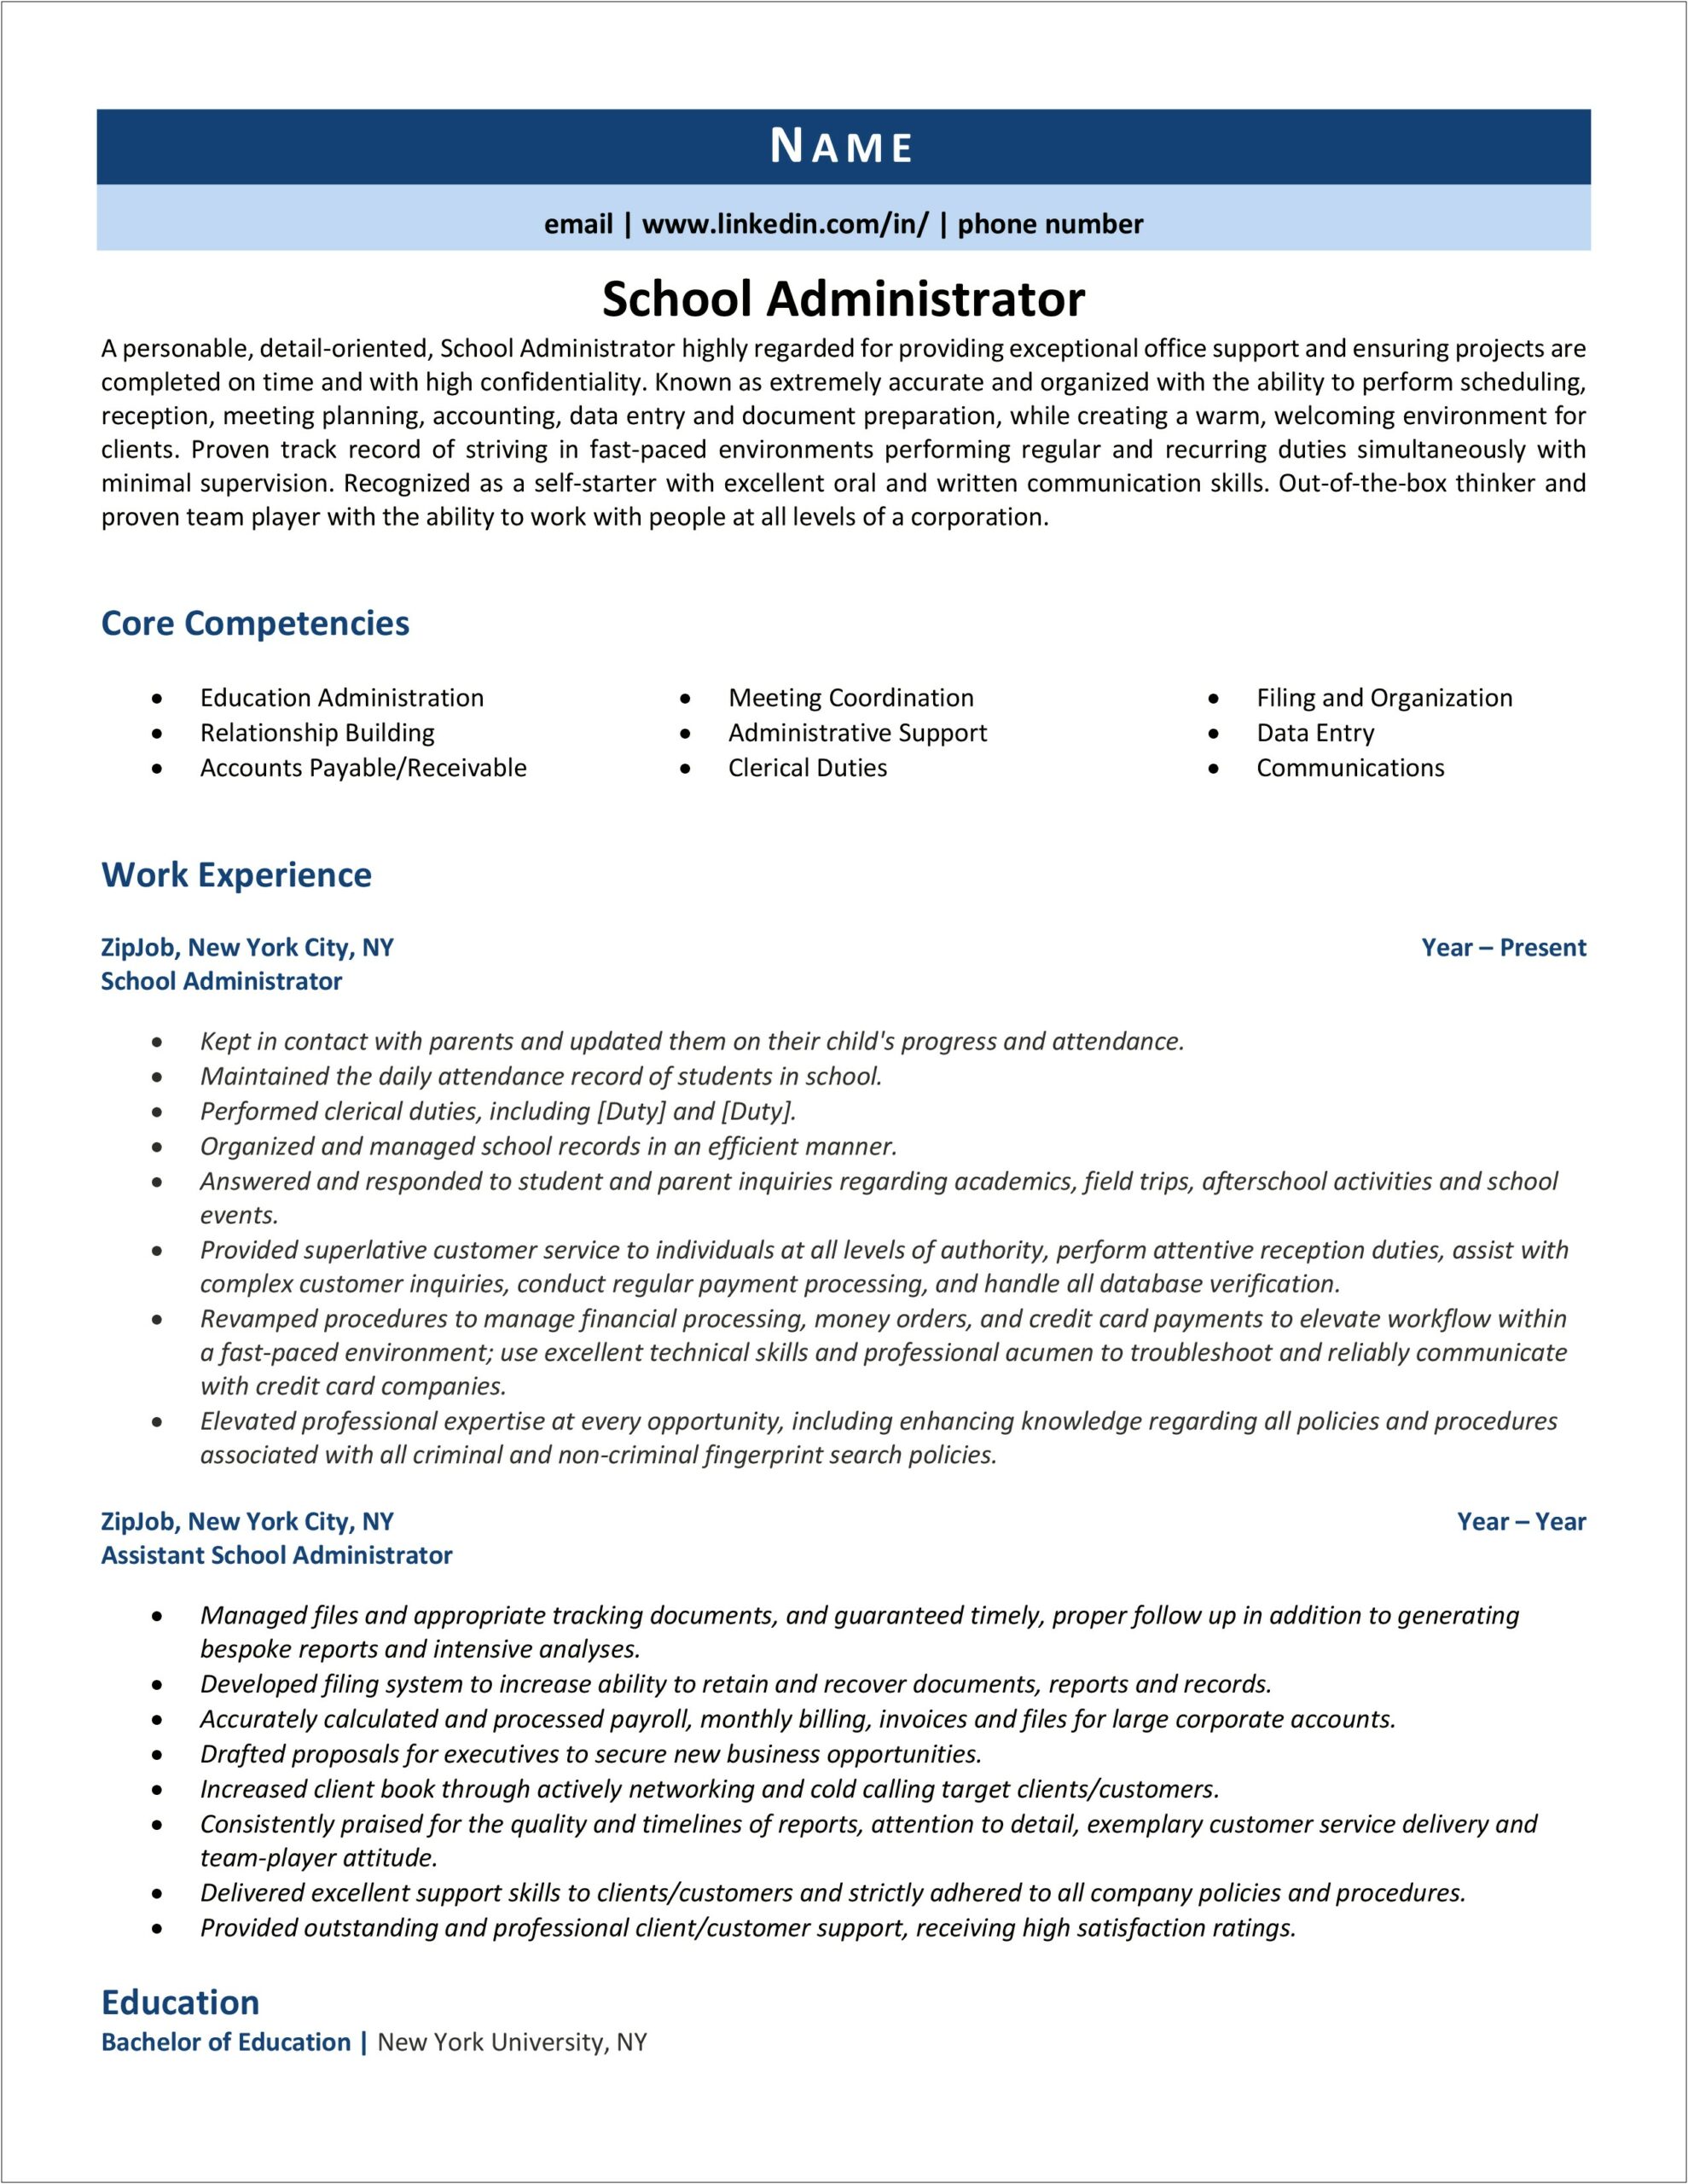 Skills Of An Effective School Administrator Resume Examples